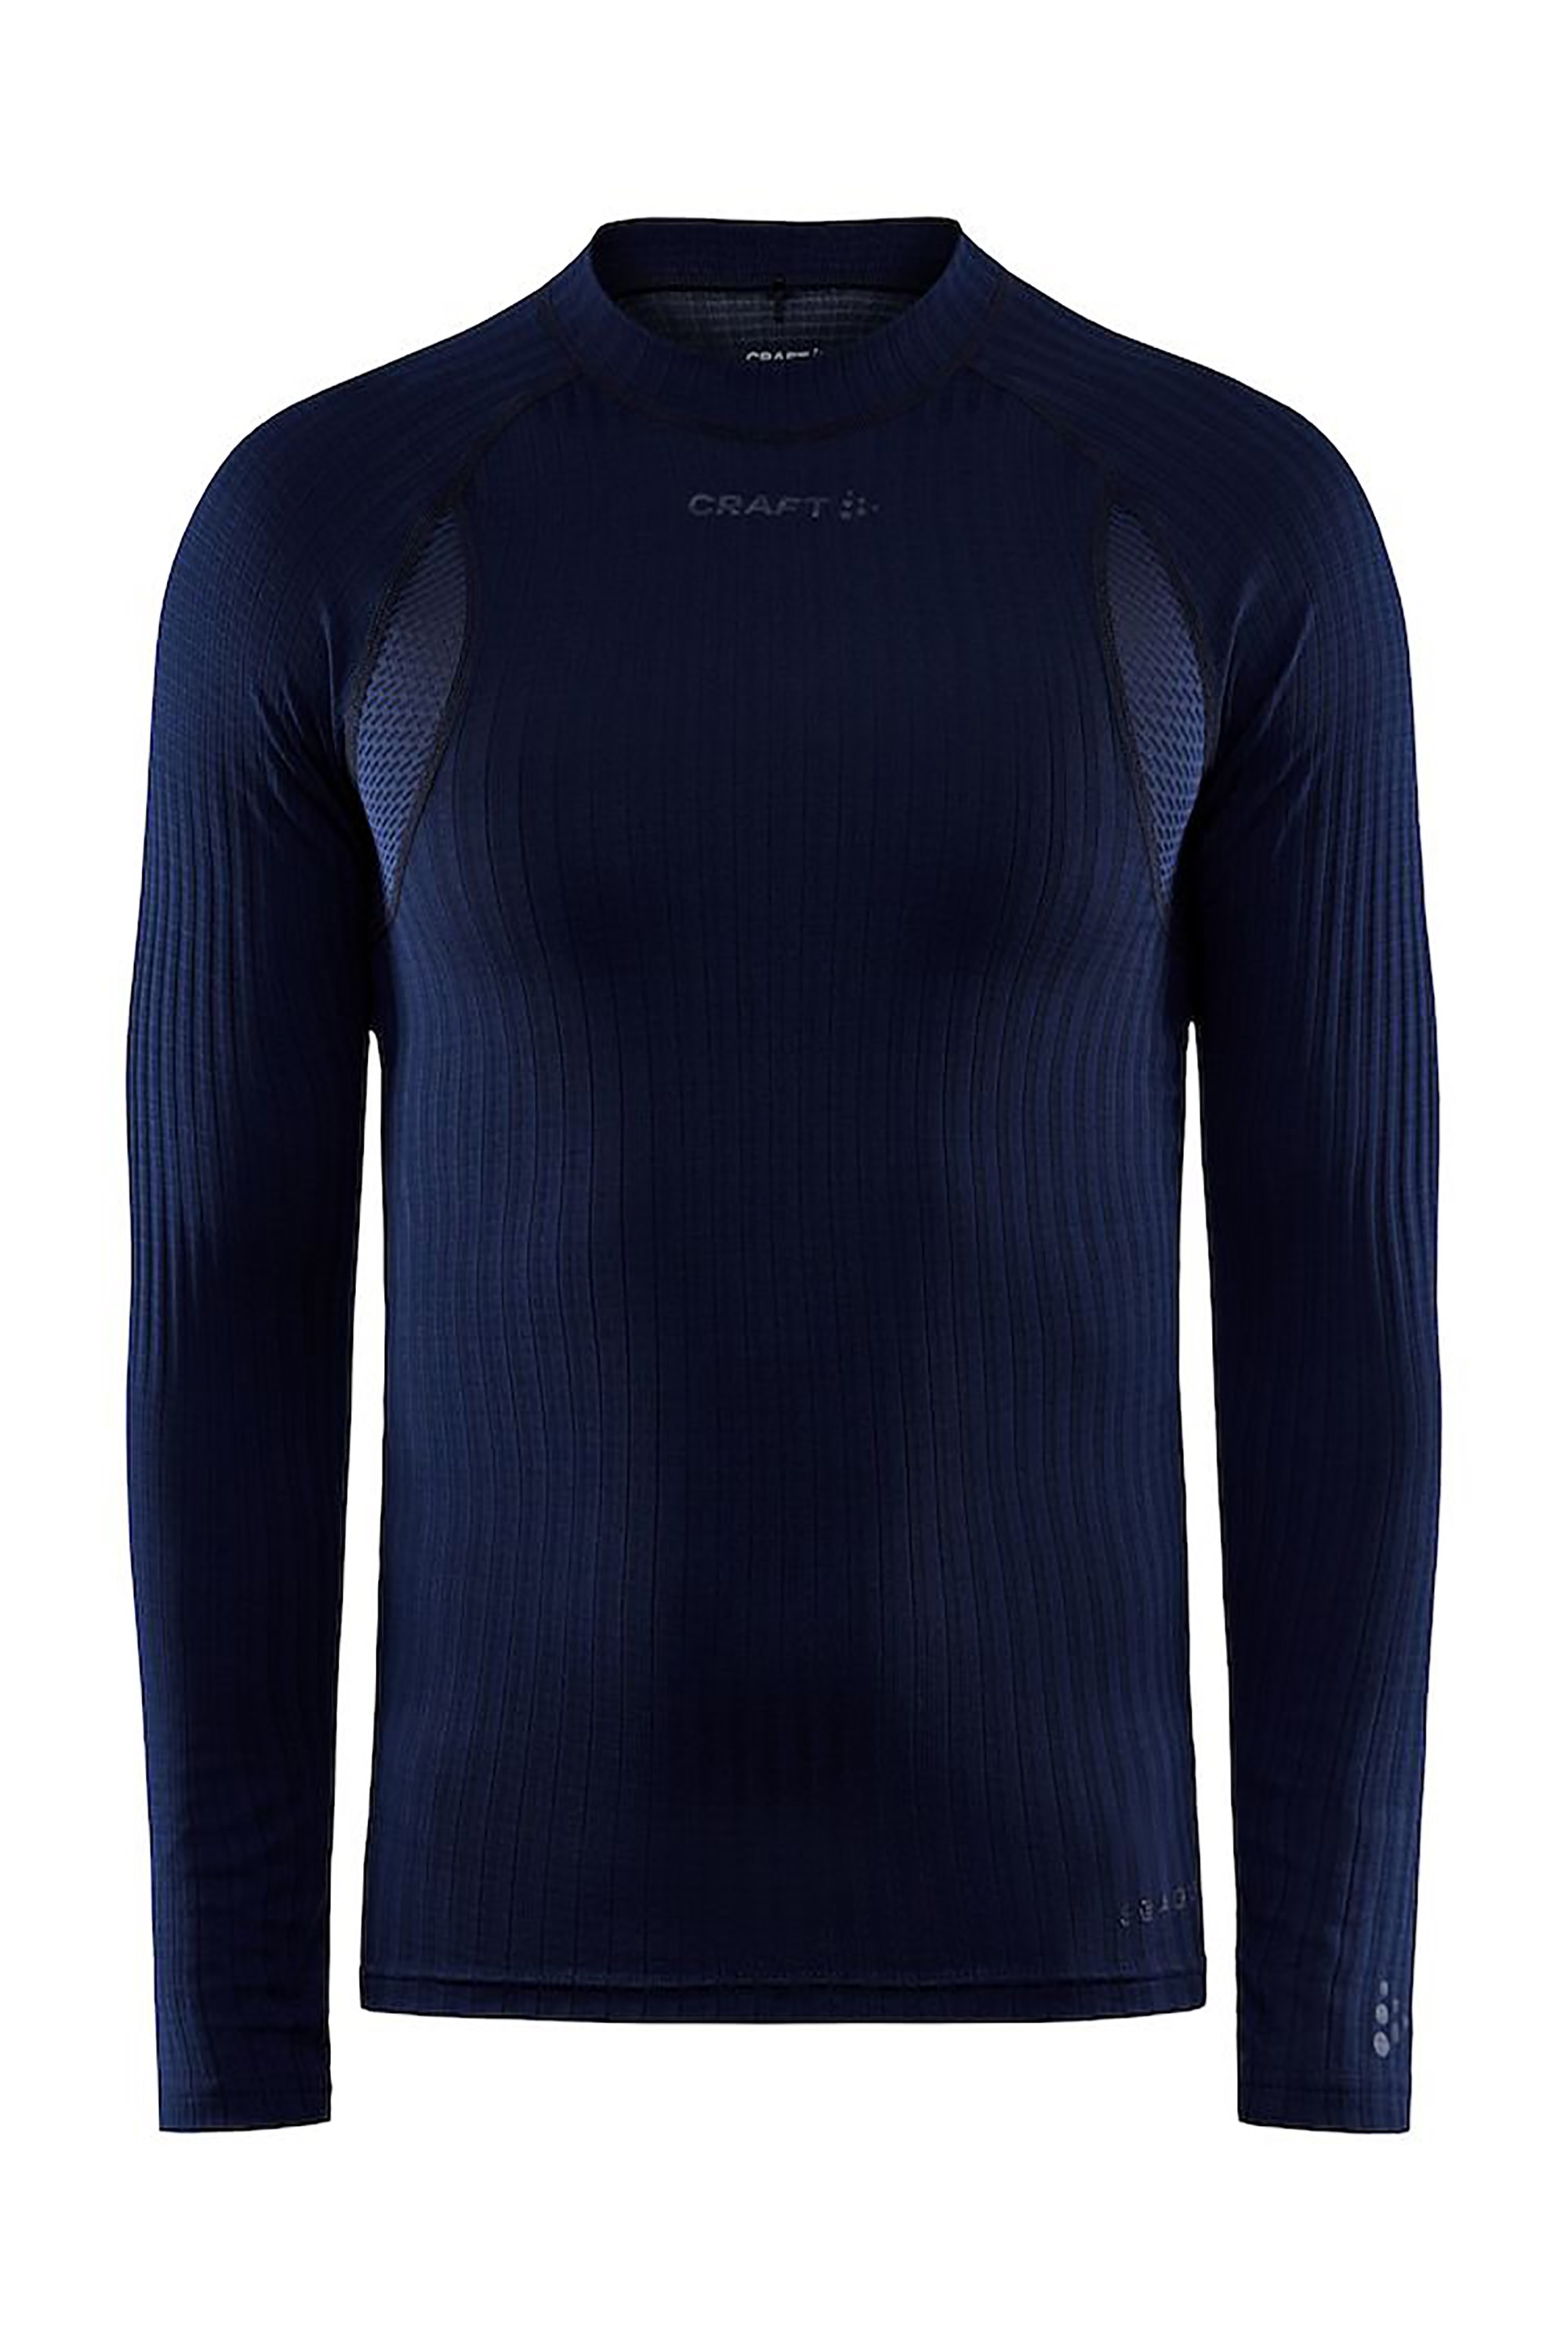 Craft Active Extreme X Thermal Shirt Women